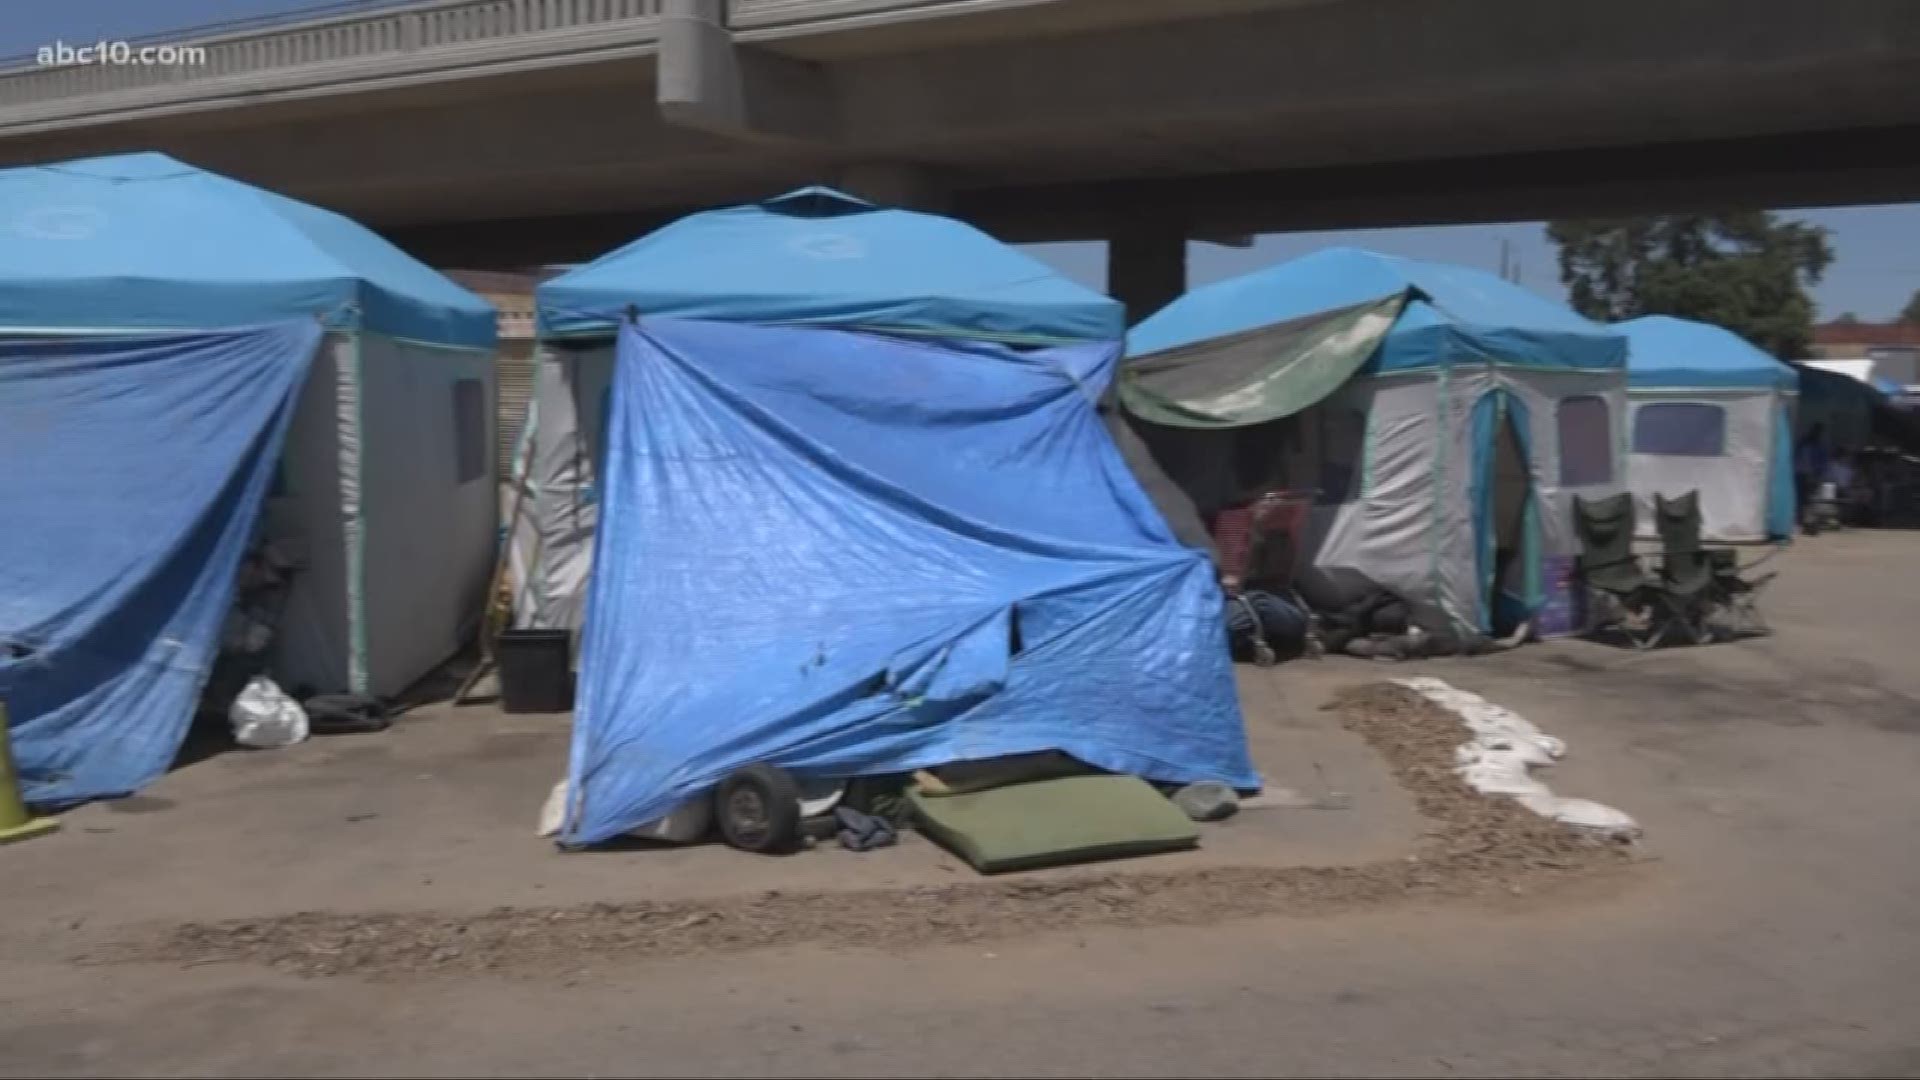 People living in tents at the Modesto Outdoor Shelter try to stay cool and hydrated in triple digit heat.